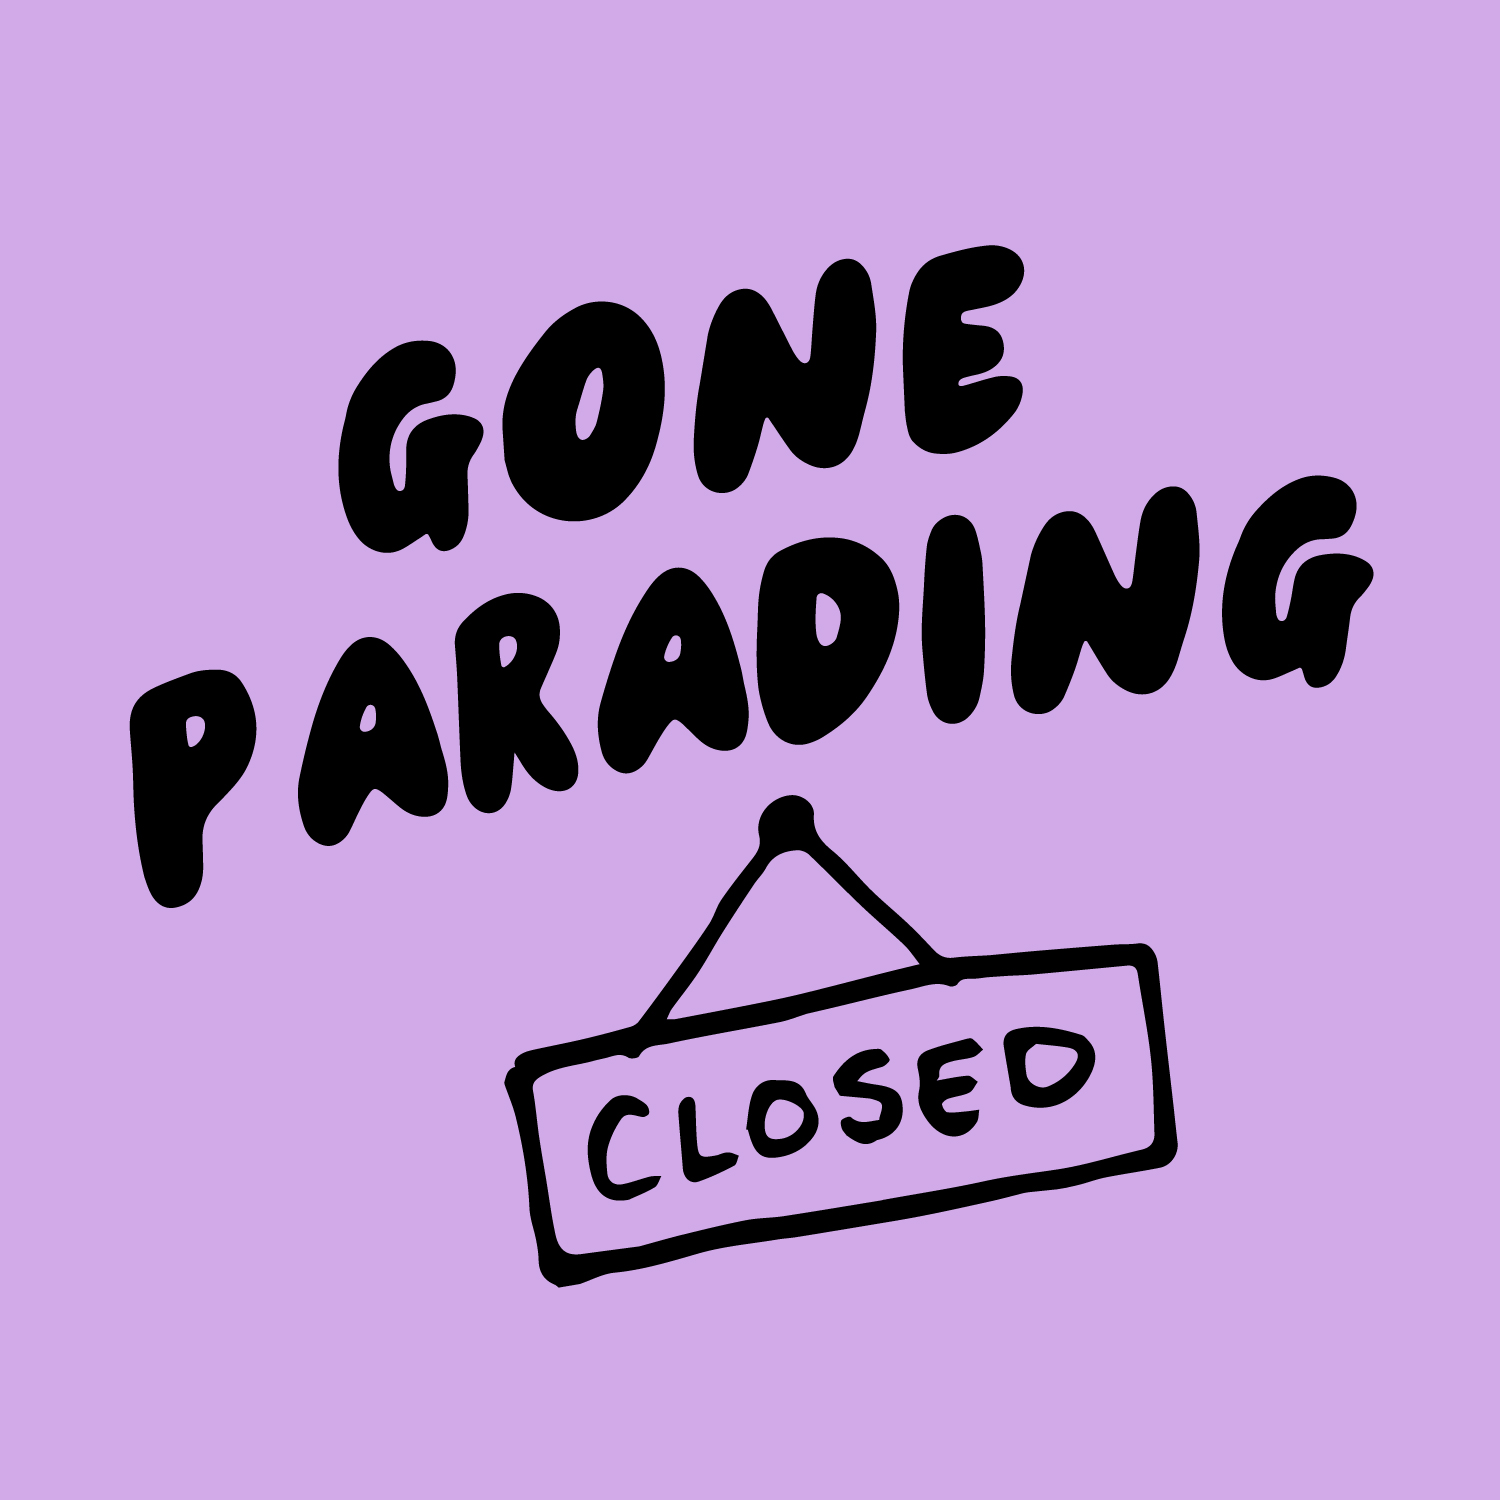 Closed-for-Parades